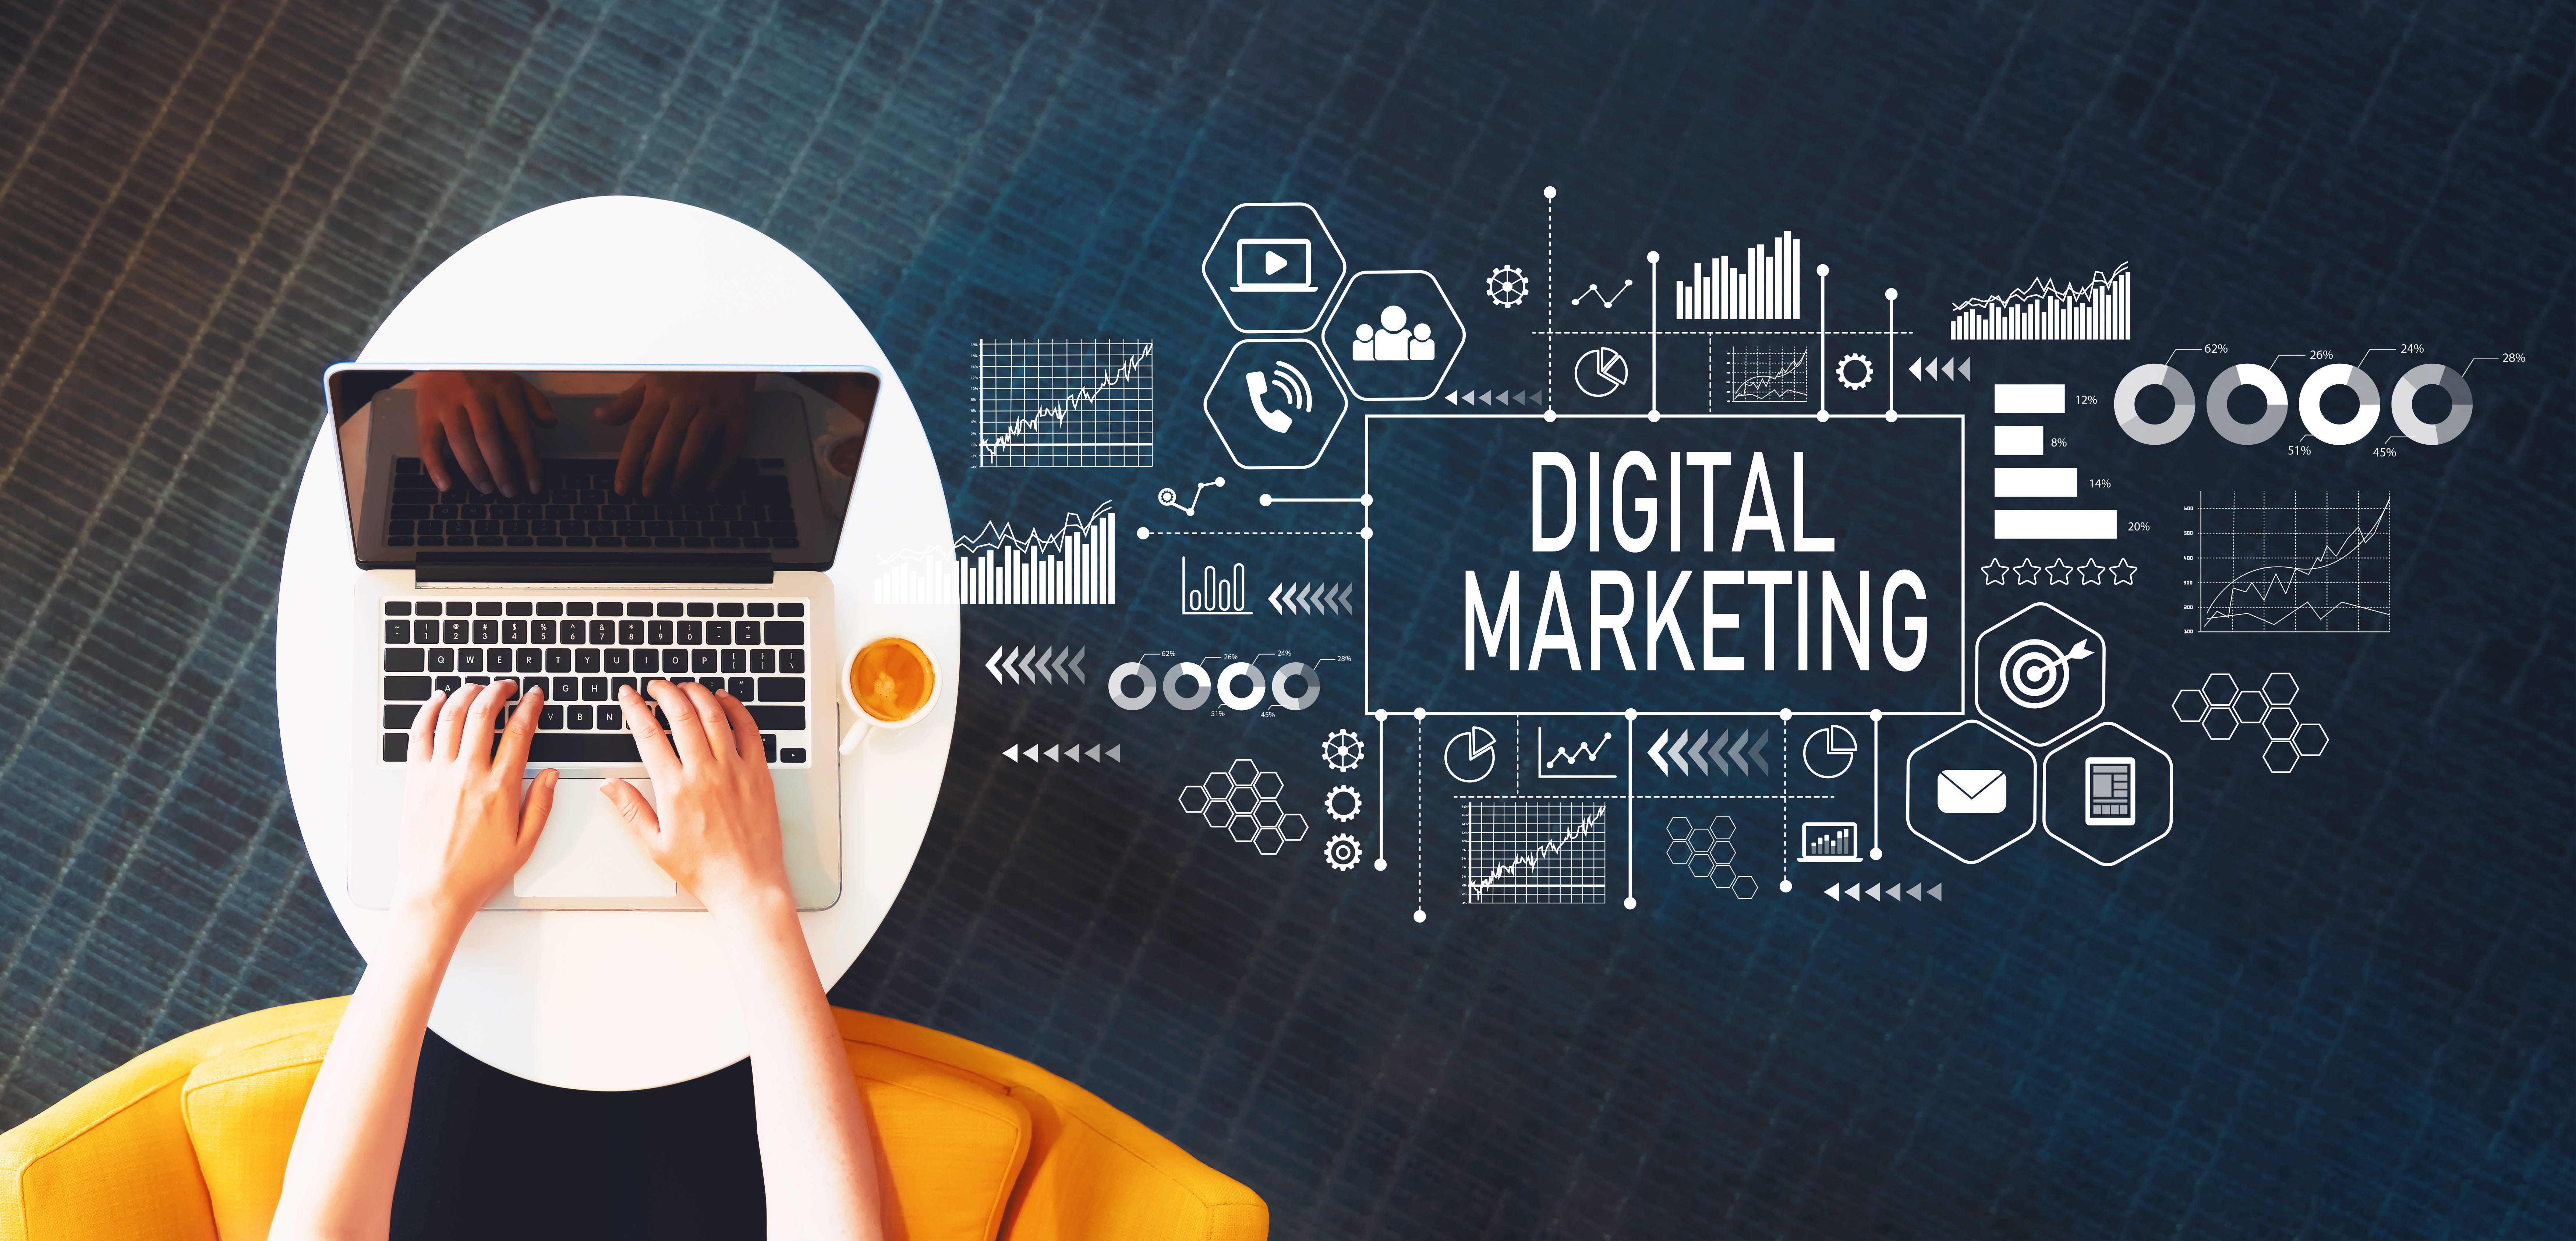 Digital Marketing Tips for Mortgage Brokers and Businesses